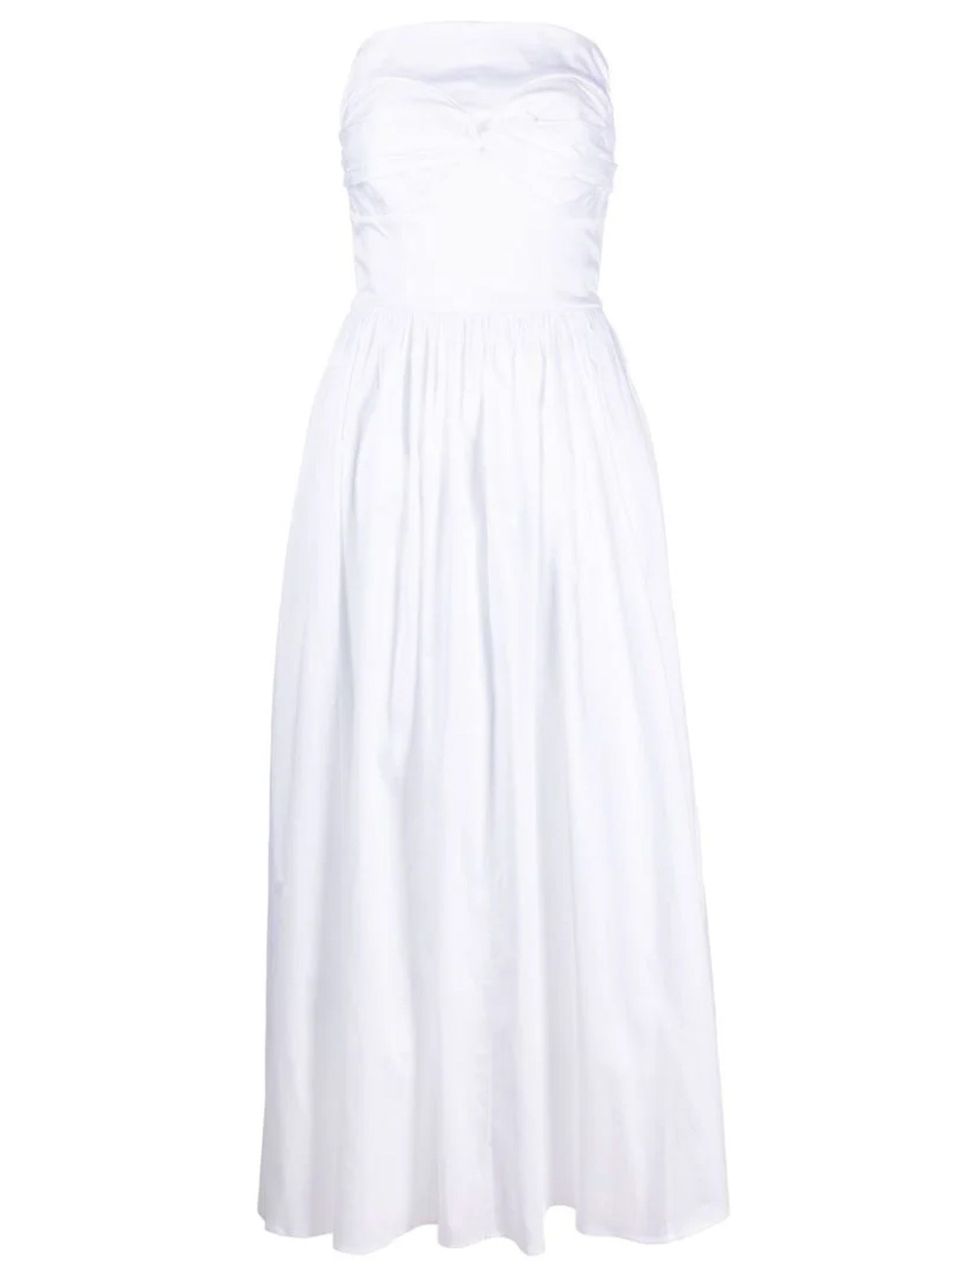 10 chic white dresses to add to your summer wardrobe